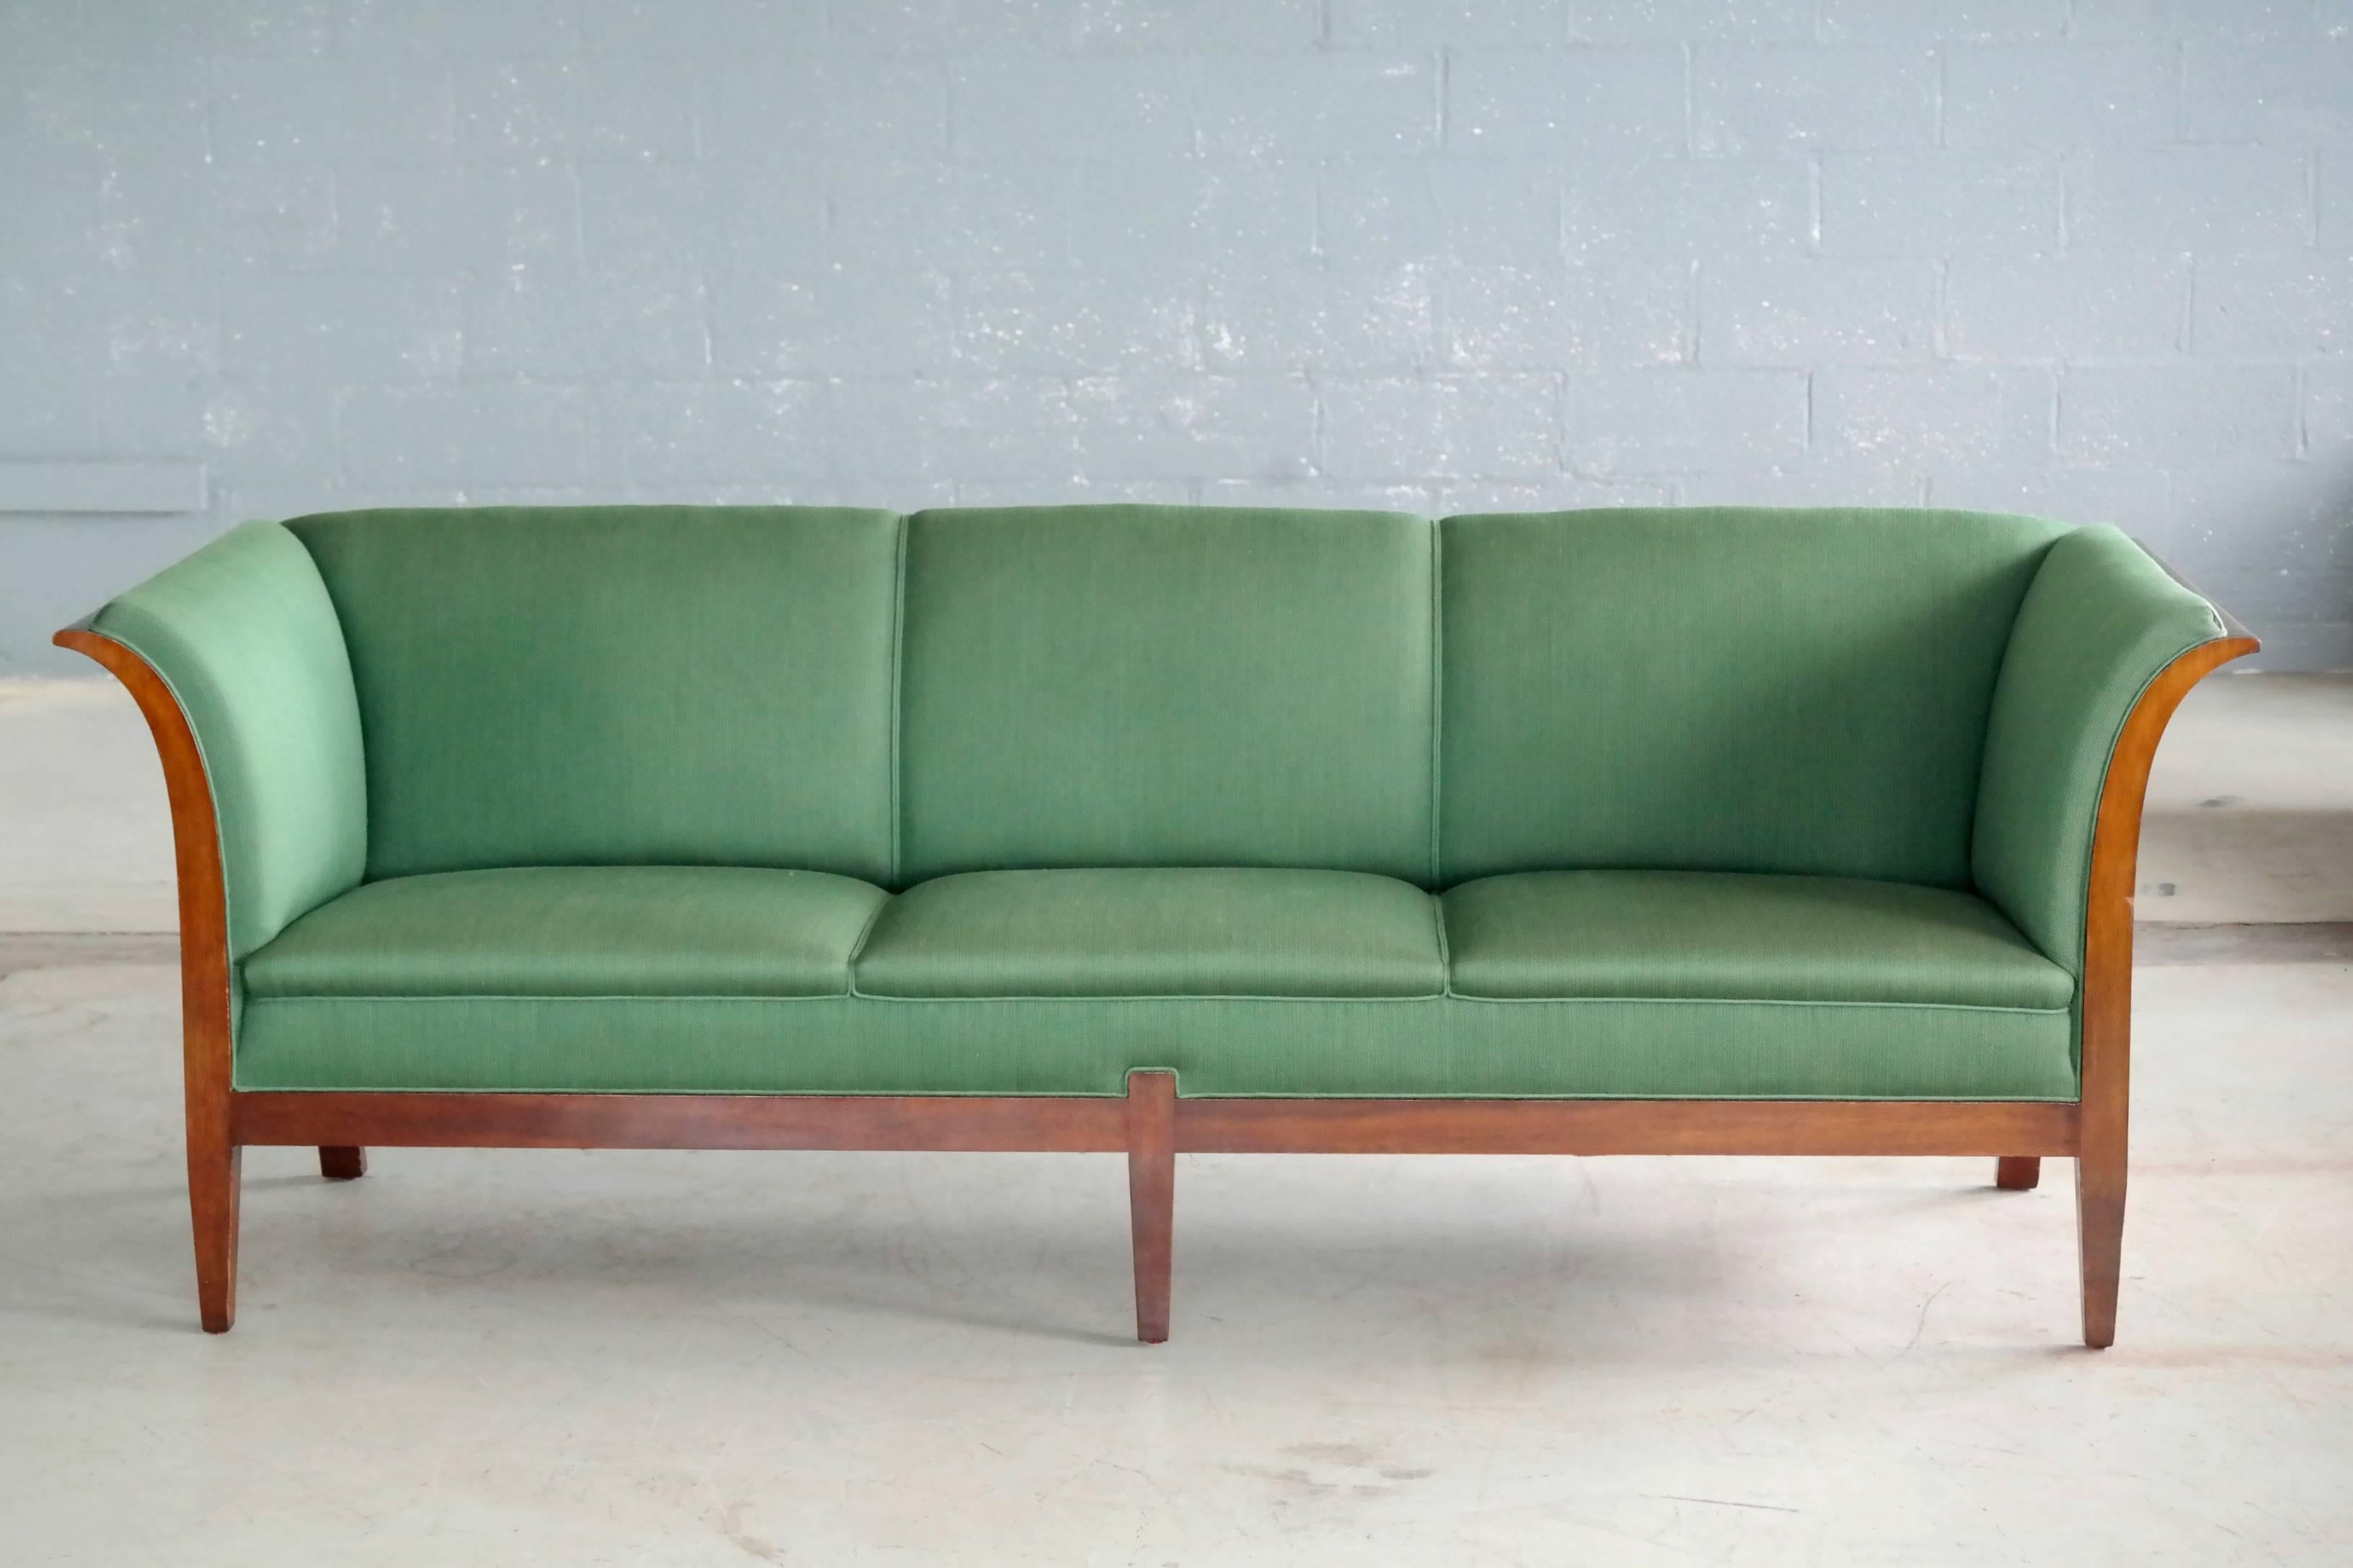 This elegant and generously sized three-seat sofa was designed and made by the Danish Master Cabinetmaker, Frits Henningsen in the 1930s and most likely produced between 1937-1942. The Cuban mahogany frame extends from flared armrests and into a